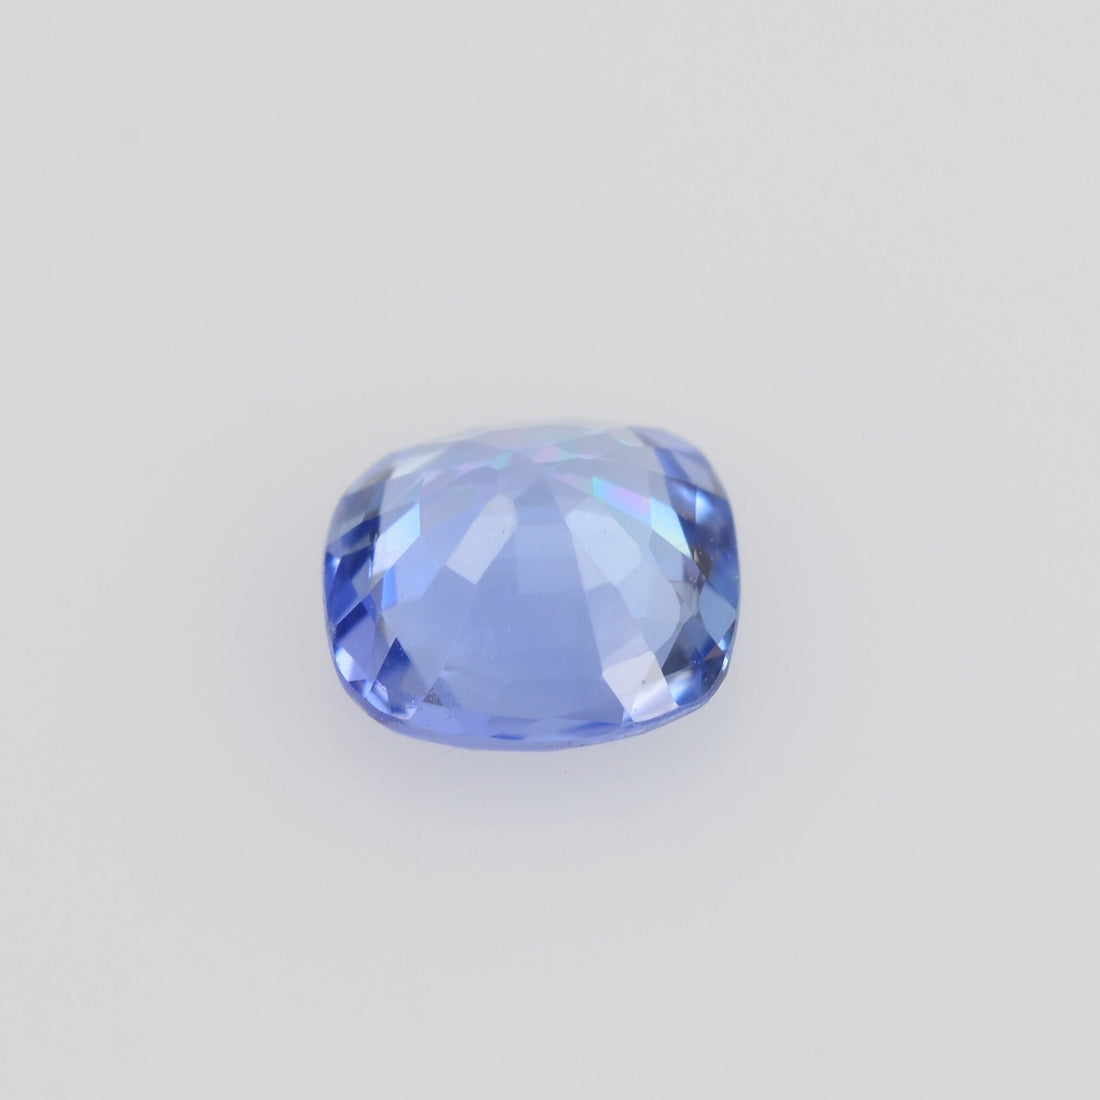 0.46-0.51 cts Natural Blue Sapphire Loose Gemstone Oval Cut